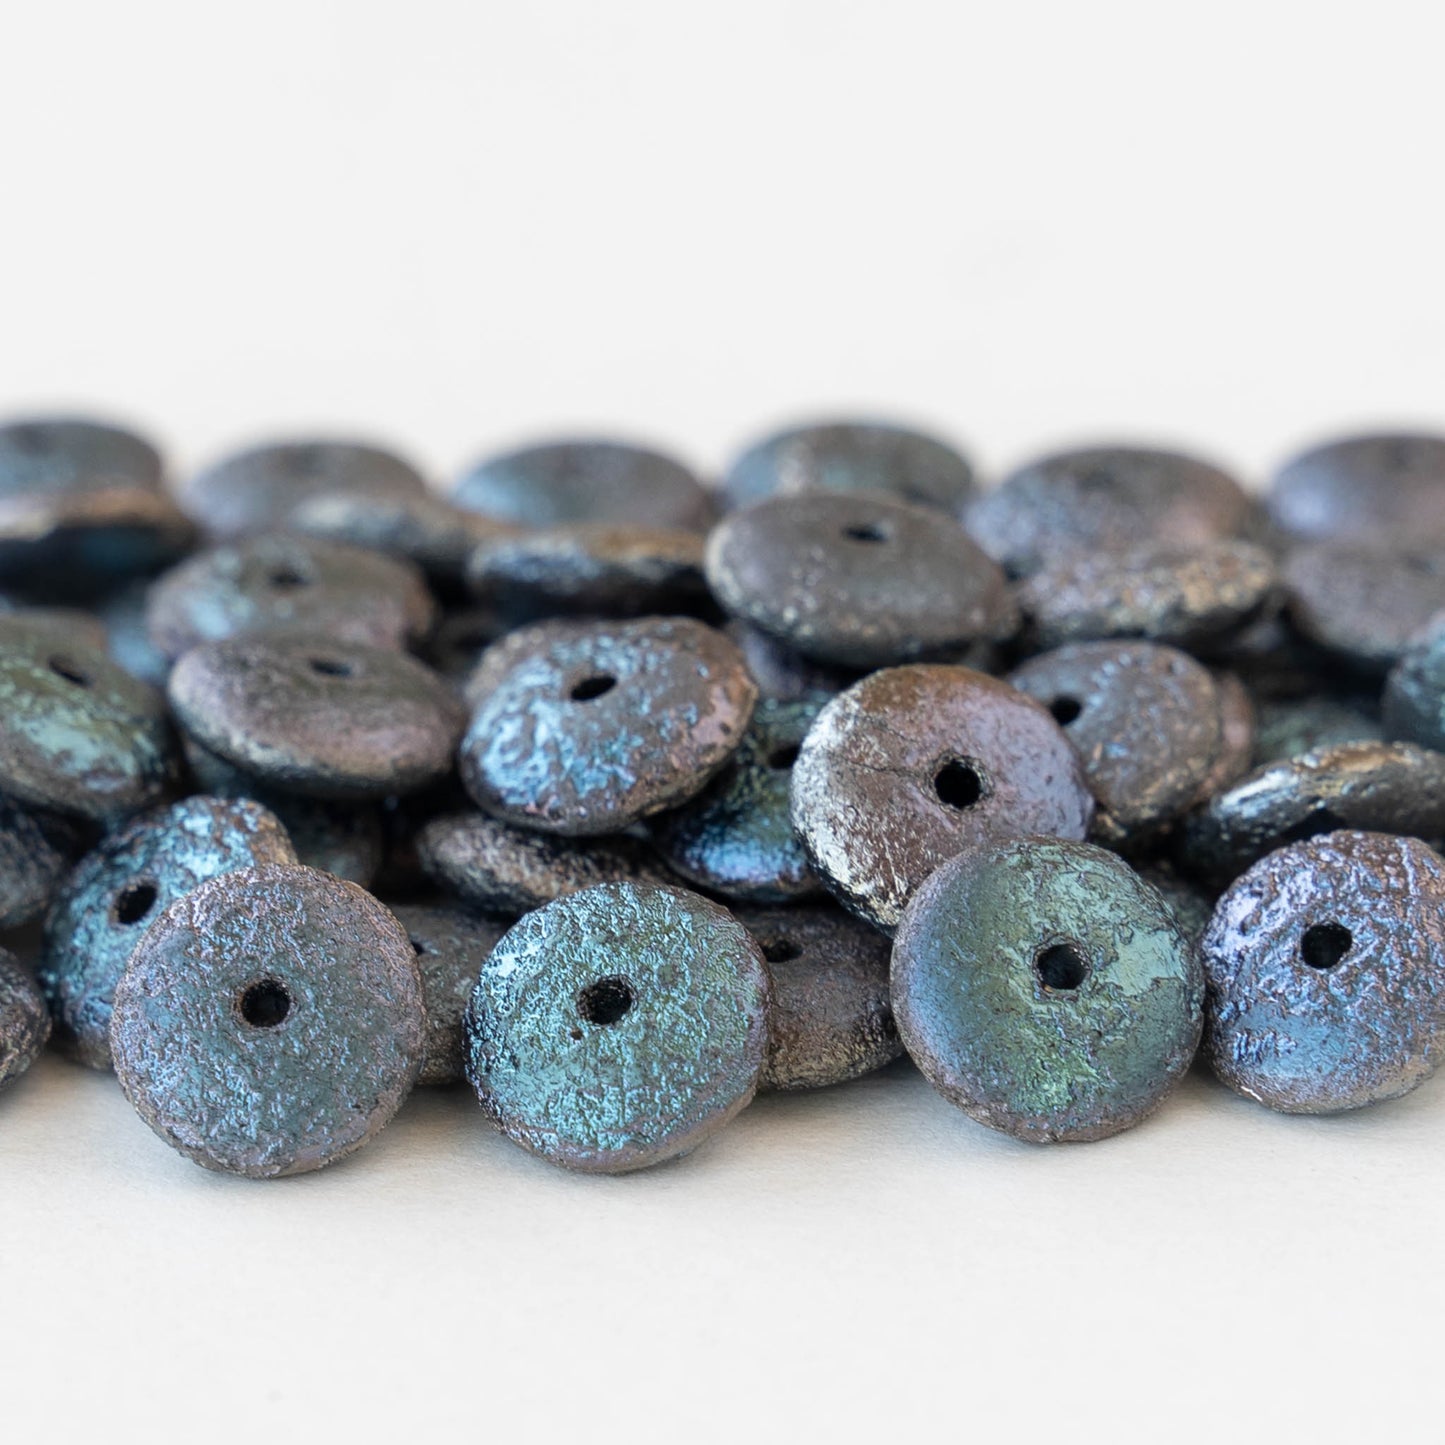 10mm Rondelle Beads - Etched Blue Metallic - 30 Beads